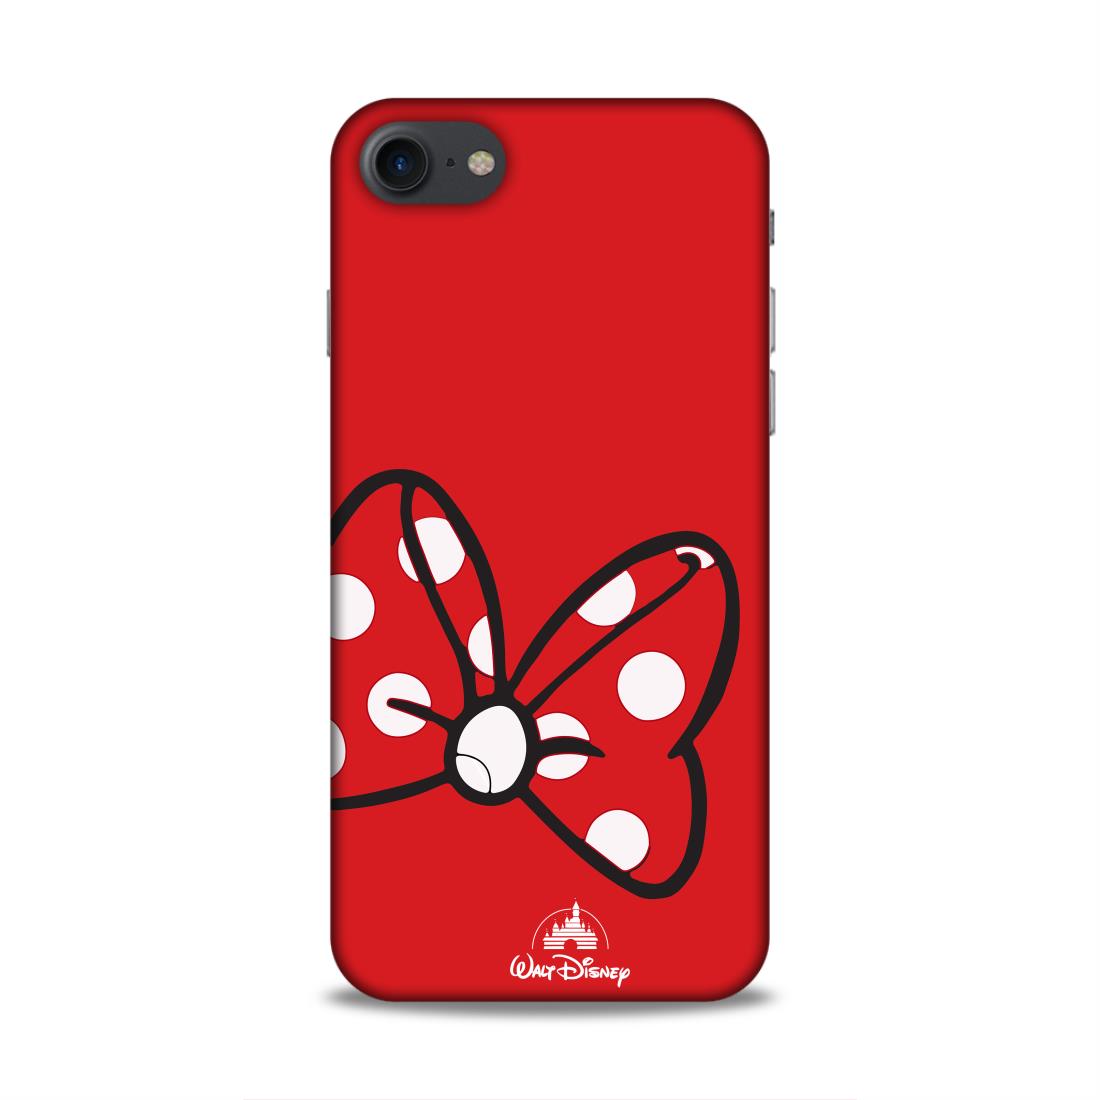 Minnie Polka Dots Hard Back Case For Apple iPhone 7 / 8 / SE 2020